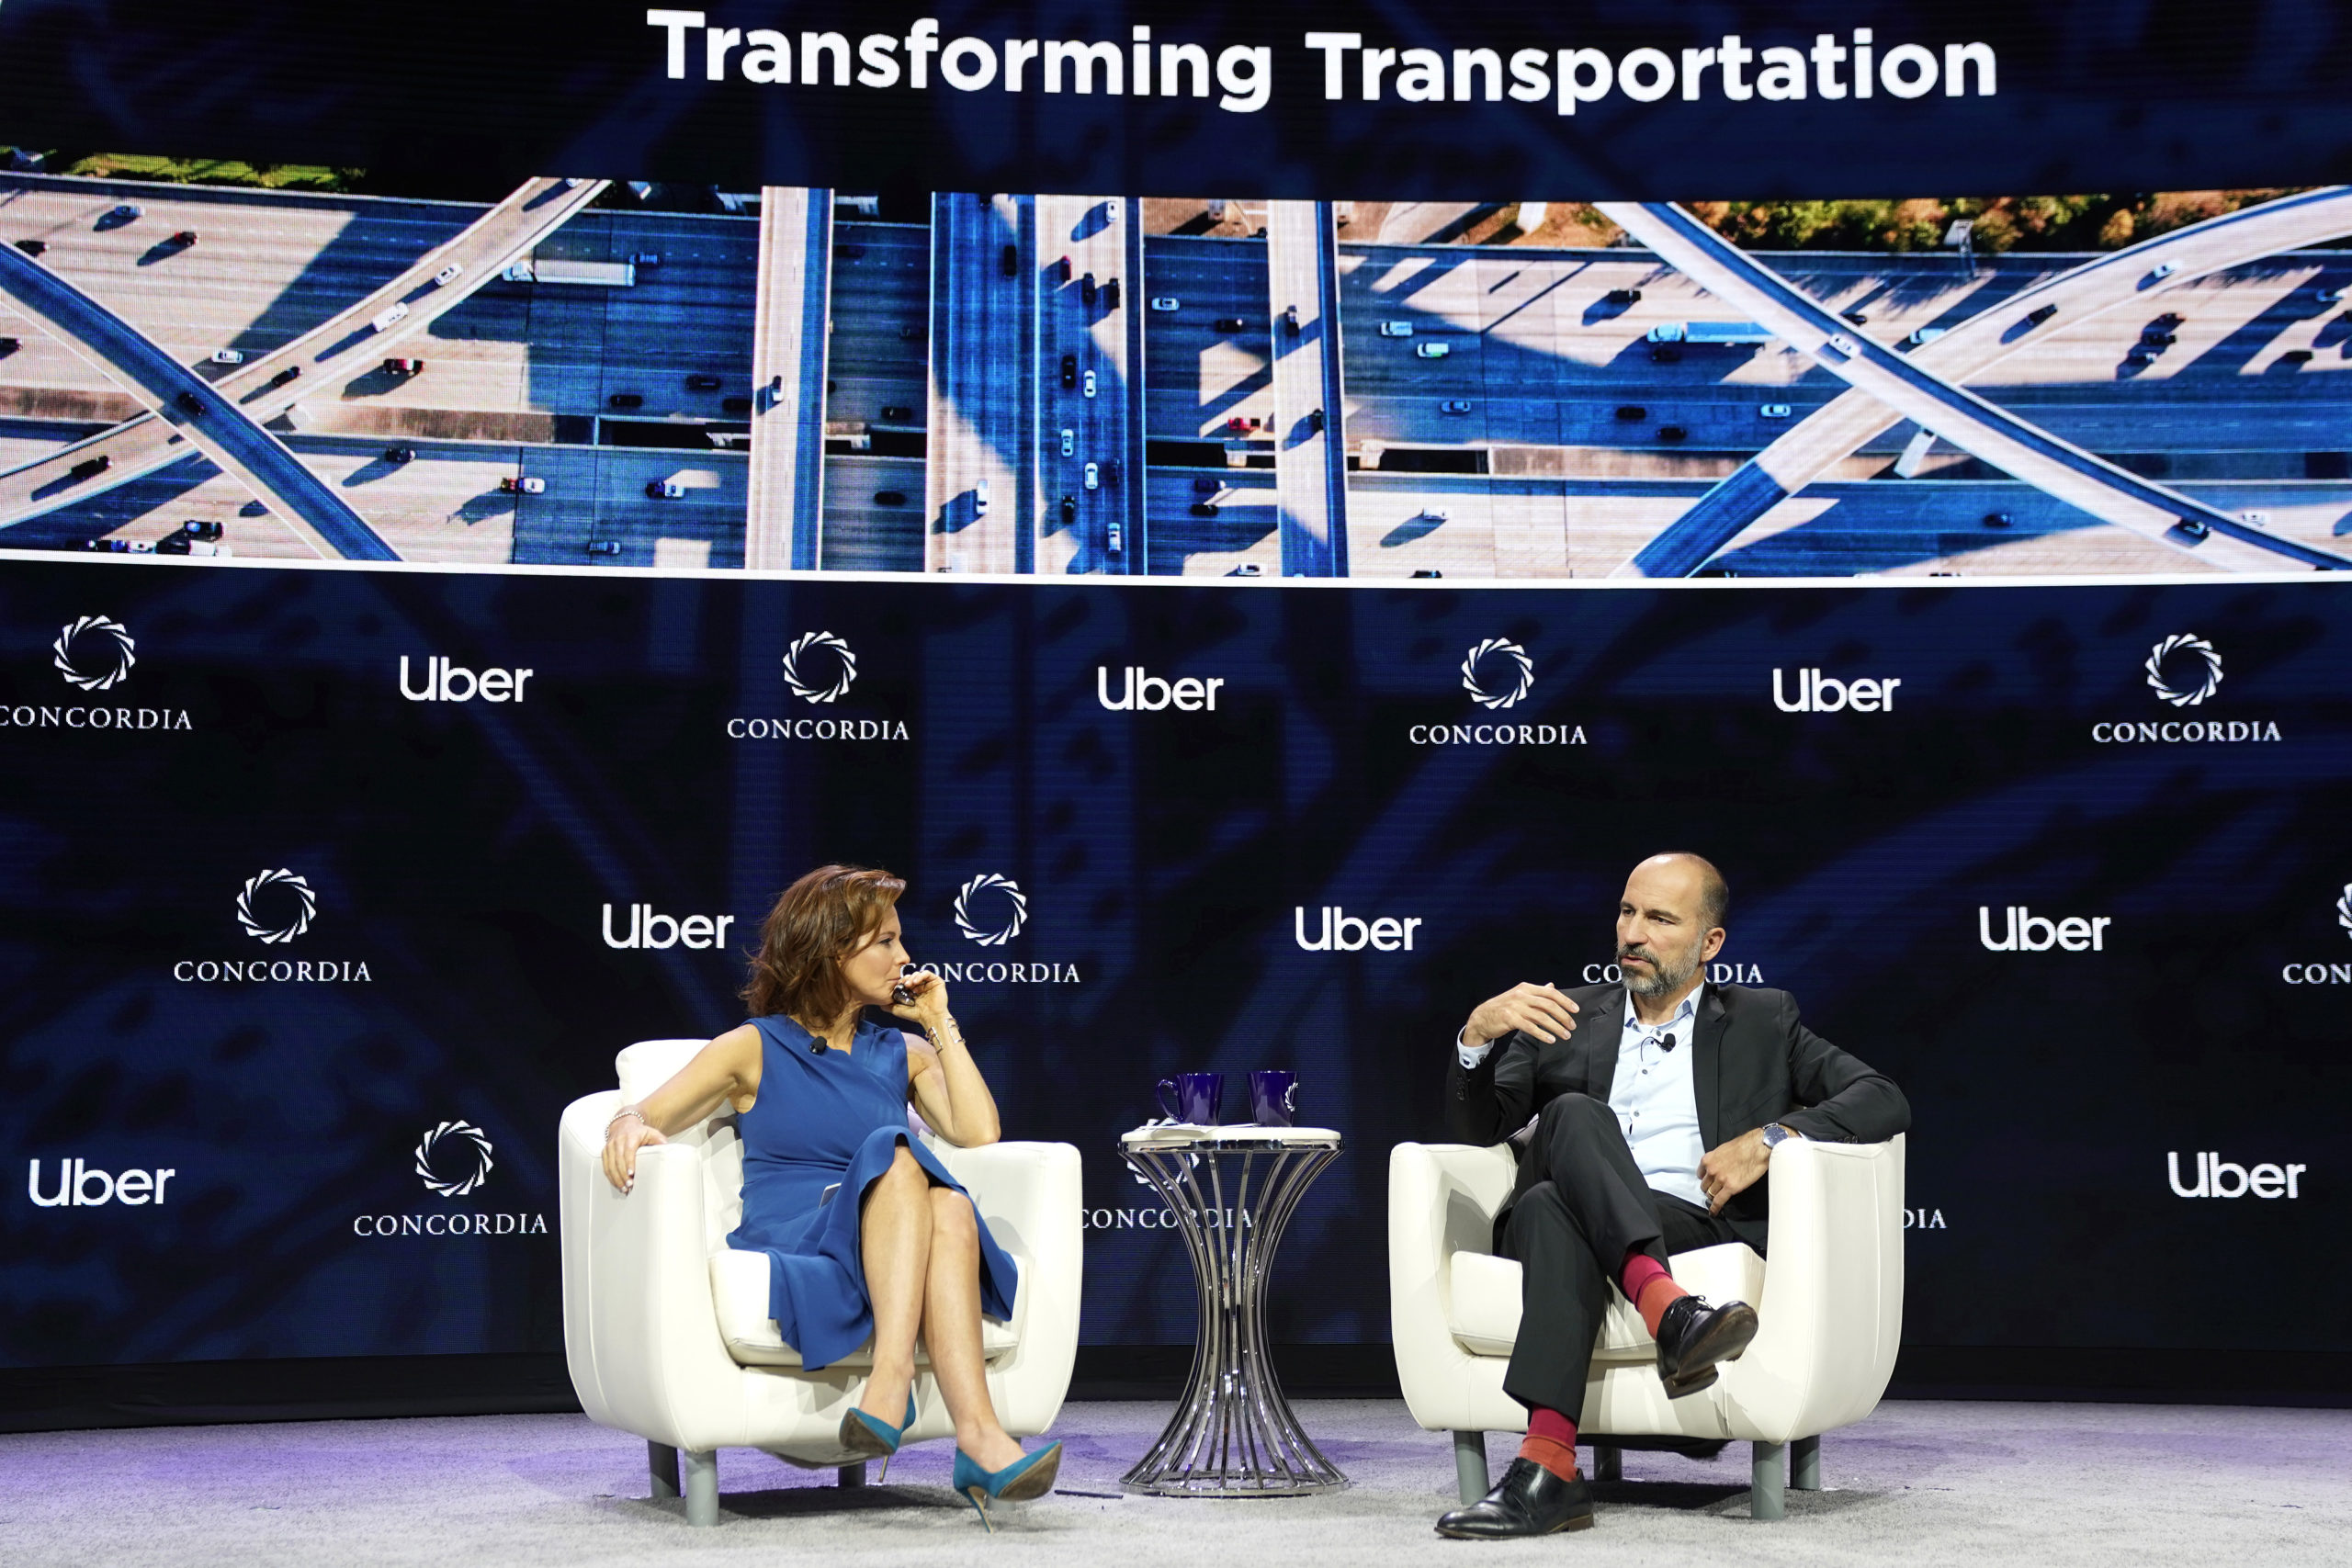 NEW YORK, NEW YORK - SEPTEMBER 24: (L-R) Stephanie Ruhle, Anchor, MSNBC, and Dara Khosrowshahi, CEO, UBER, speak onstage during the 2019 Concordia Annual Summit - Day 2 at Grand Hyatt New York on September 24, 2019 in New York City. (Photo by Riccardo Savi/Getty Images for Concordia Summit)